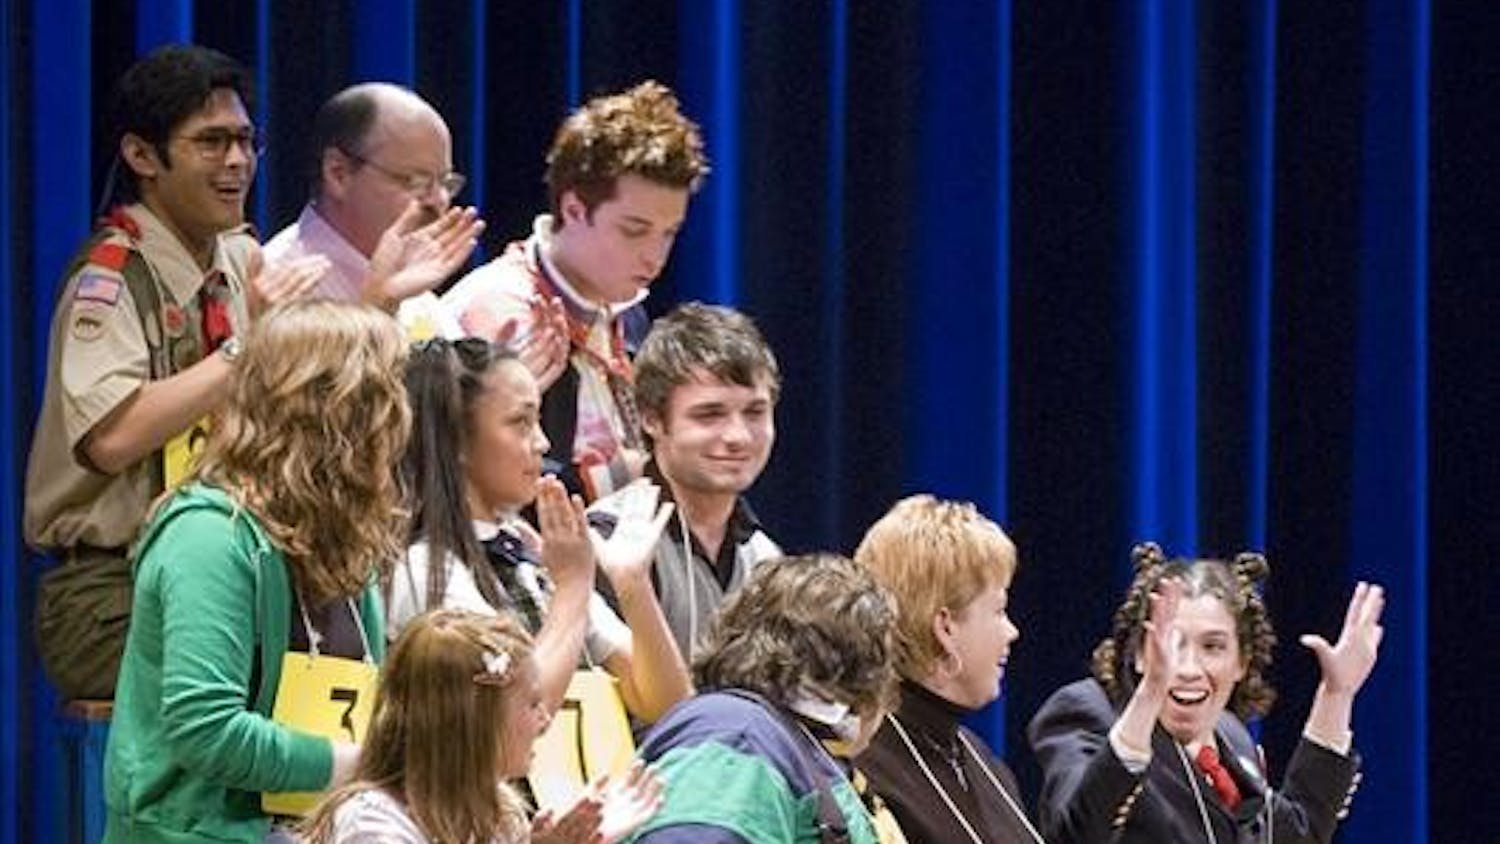 Spelling bee participants applaud the commencement of the spelling bee on Wednesday evening at IU Auditorium. This one-act Broadway musical is a Tony-Awward winning performance. 